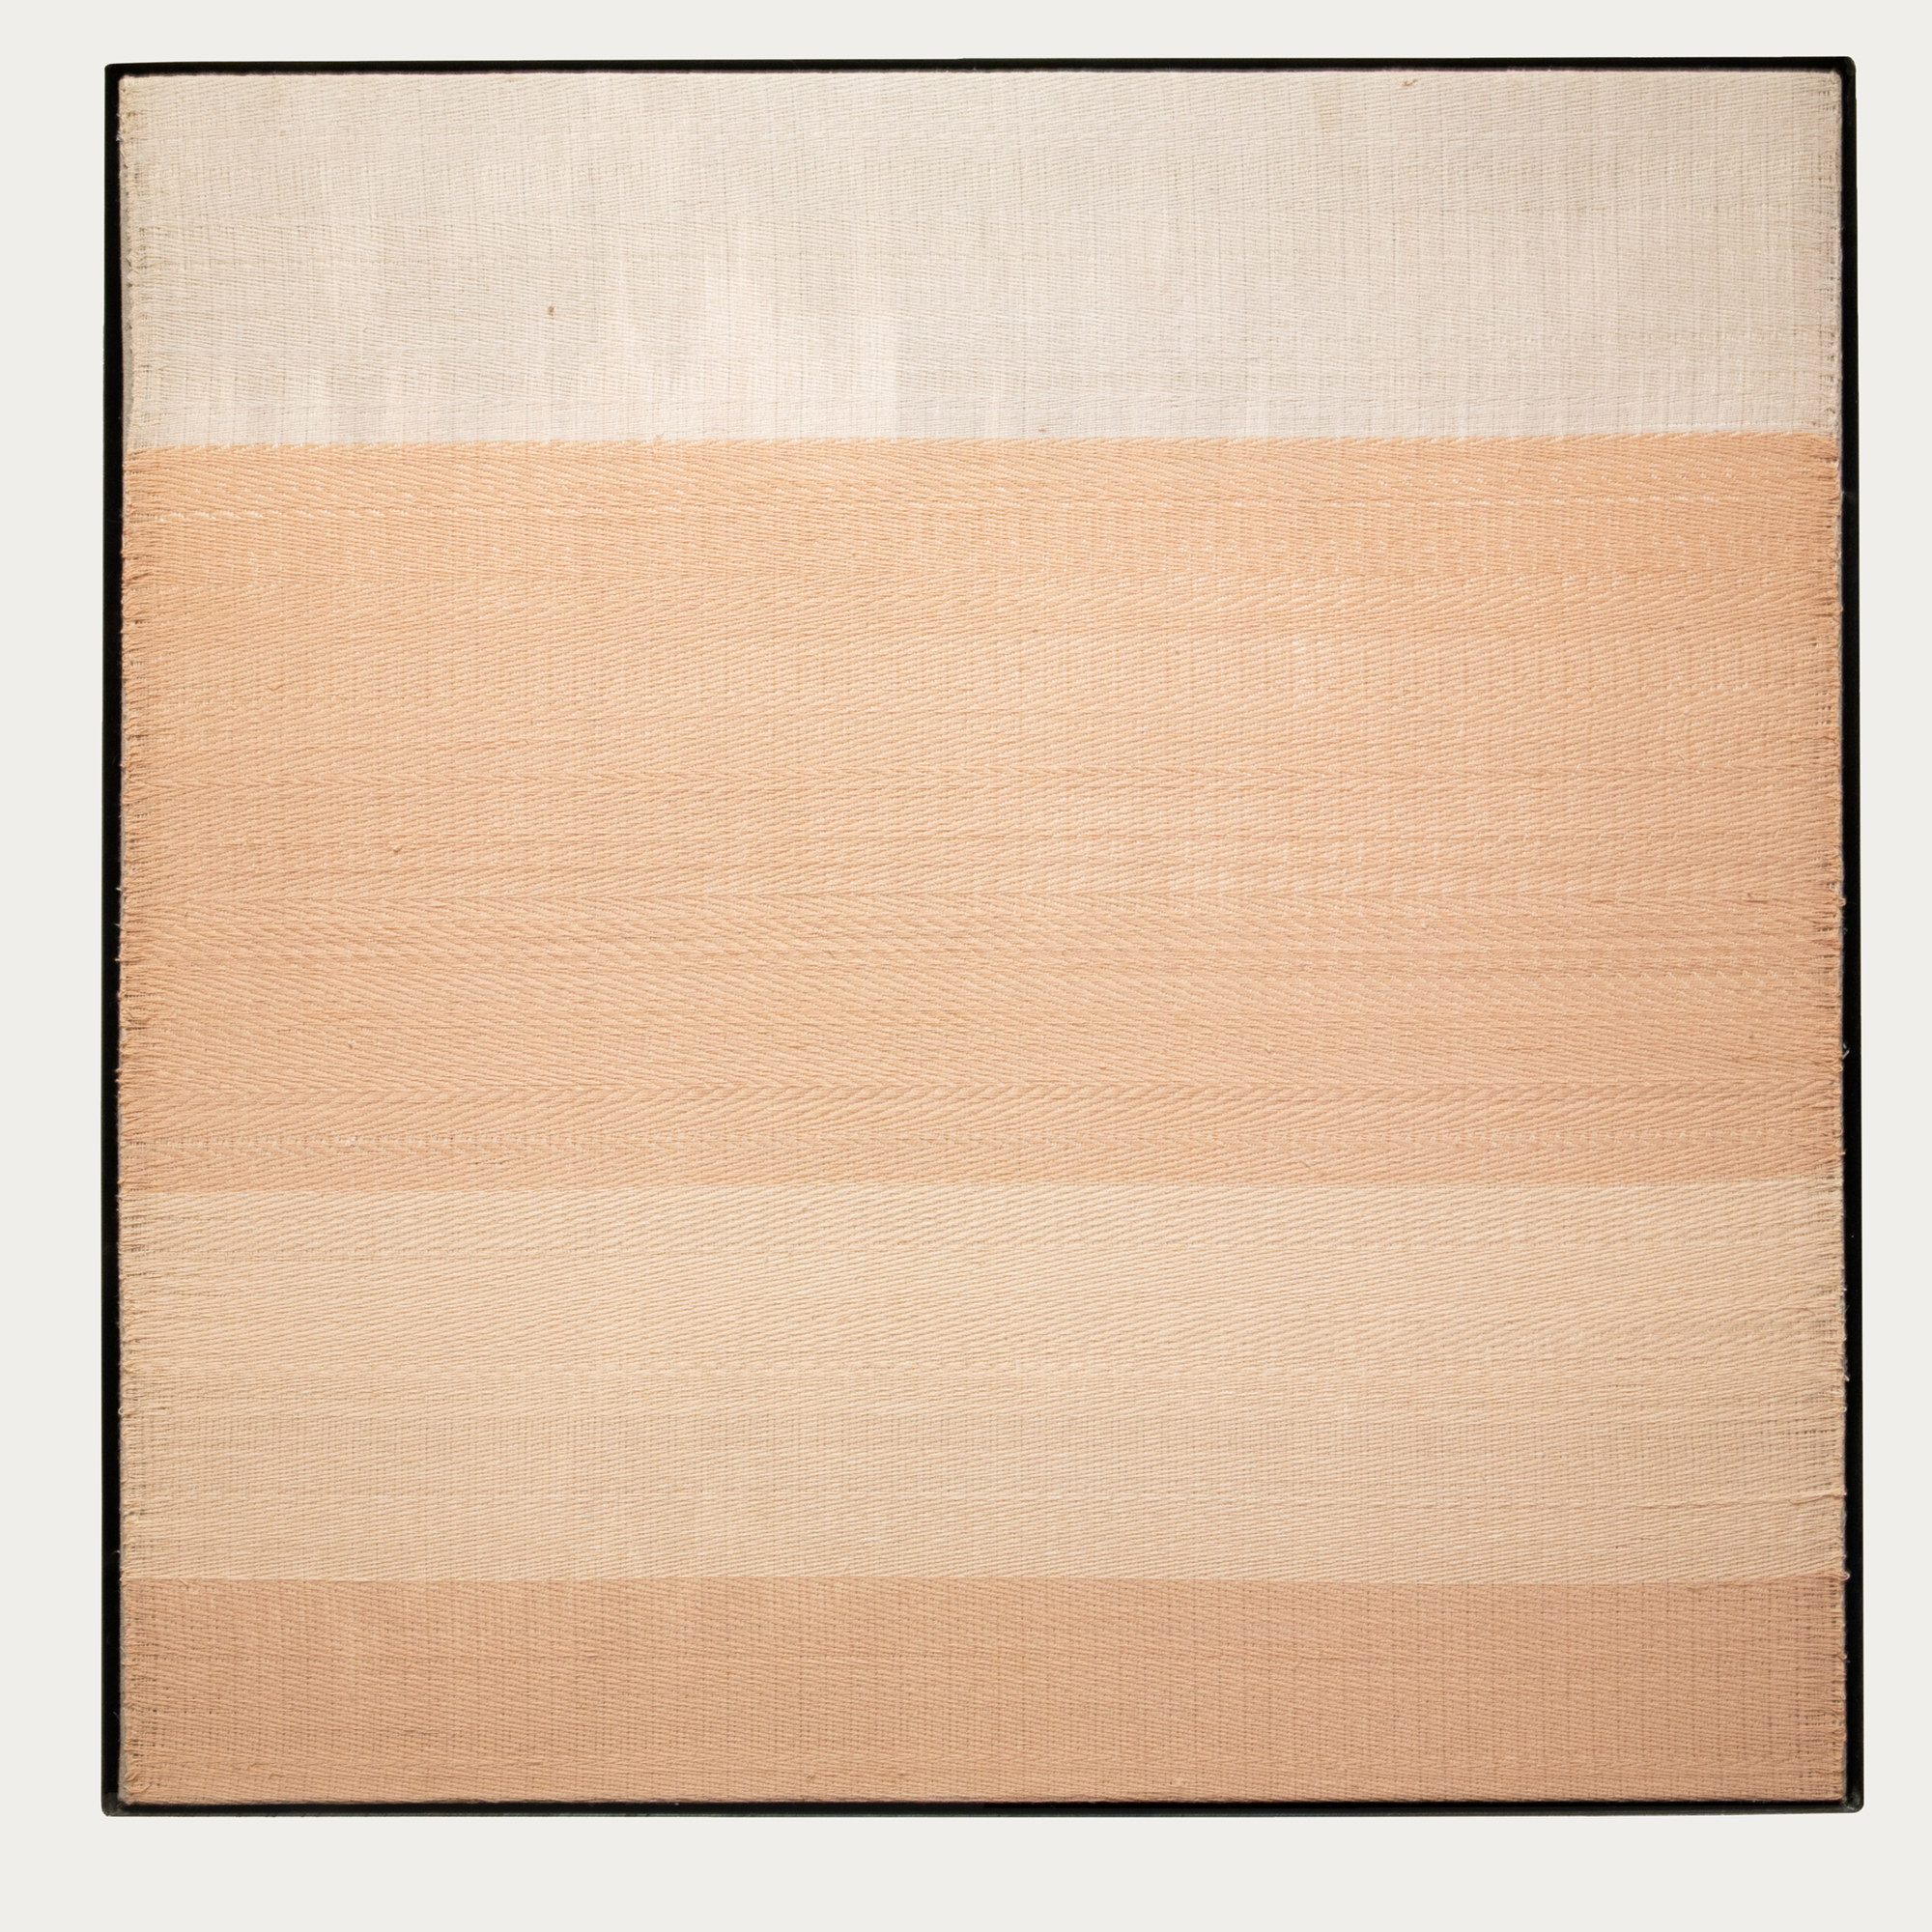 

											Elizabeth Hohimer</b>

											<em>
												Cessation</em> 

											<h4>
												June 26 – August 29, 2020											</h4>

		                																																													<i>Mirage 1,</i>  
																																								2020, 
																																								hand woven West Texas cotton stained with clay and copper thread stretched over linen in steel frame, 
																																								 36 3/4 x 36 3/4 x 2 1/2 inches 
																								
		                				